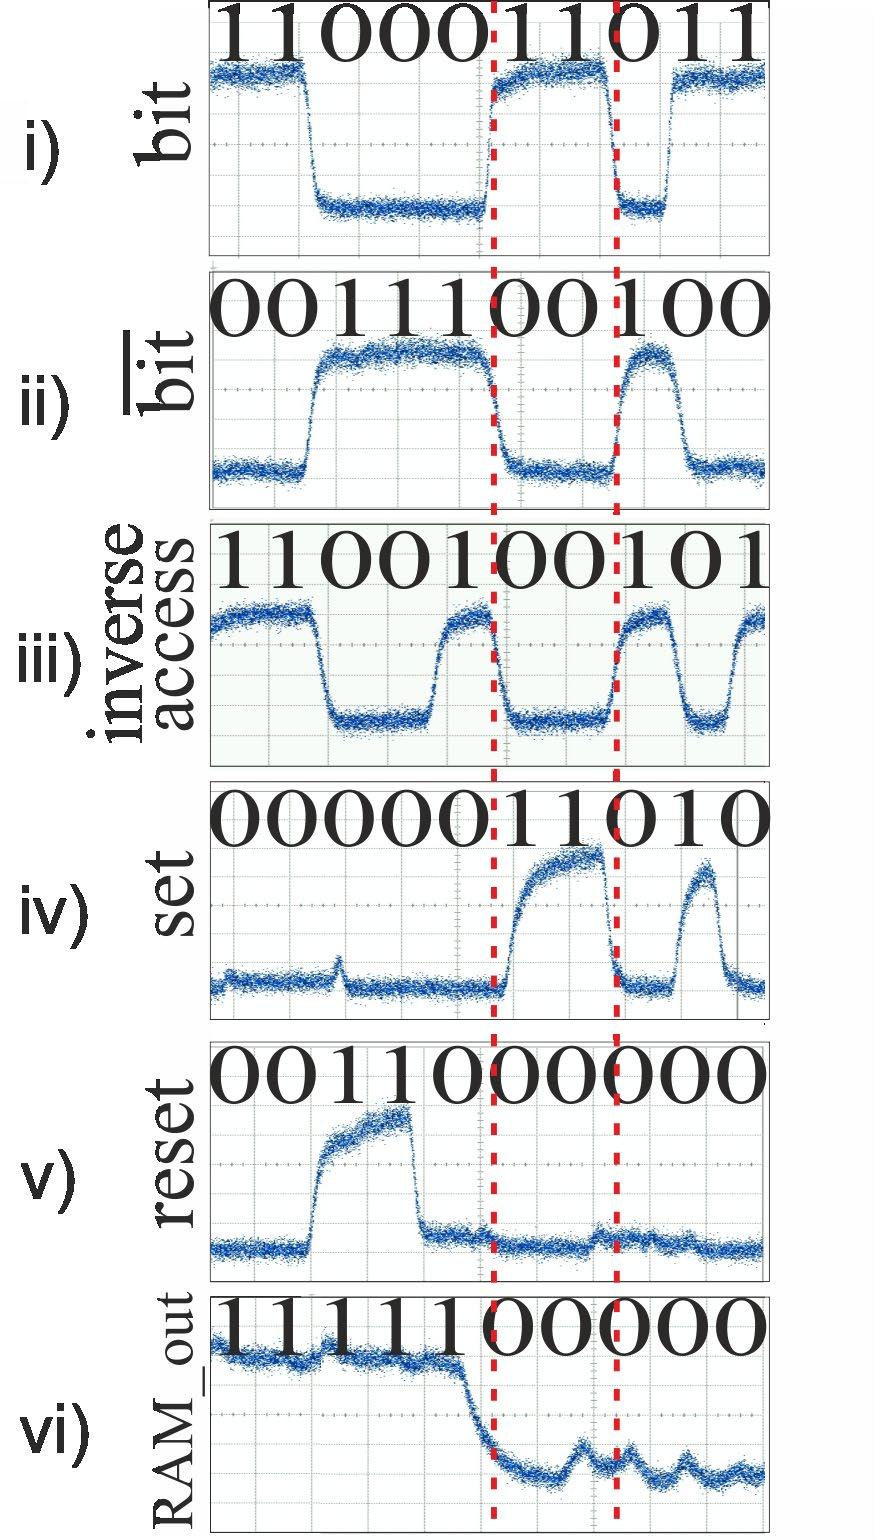 CHAPTER 4: XPM-BASED BROADBAND OPTICAL RAM CELL in wavelength conversion, with its optical spectrum during normal operation being illustrated in Fig. 26, for a CW and control signal.